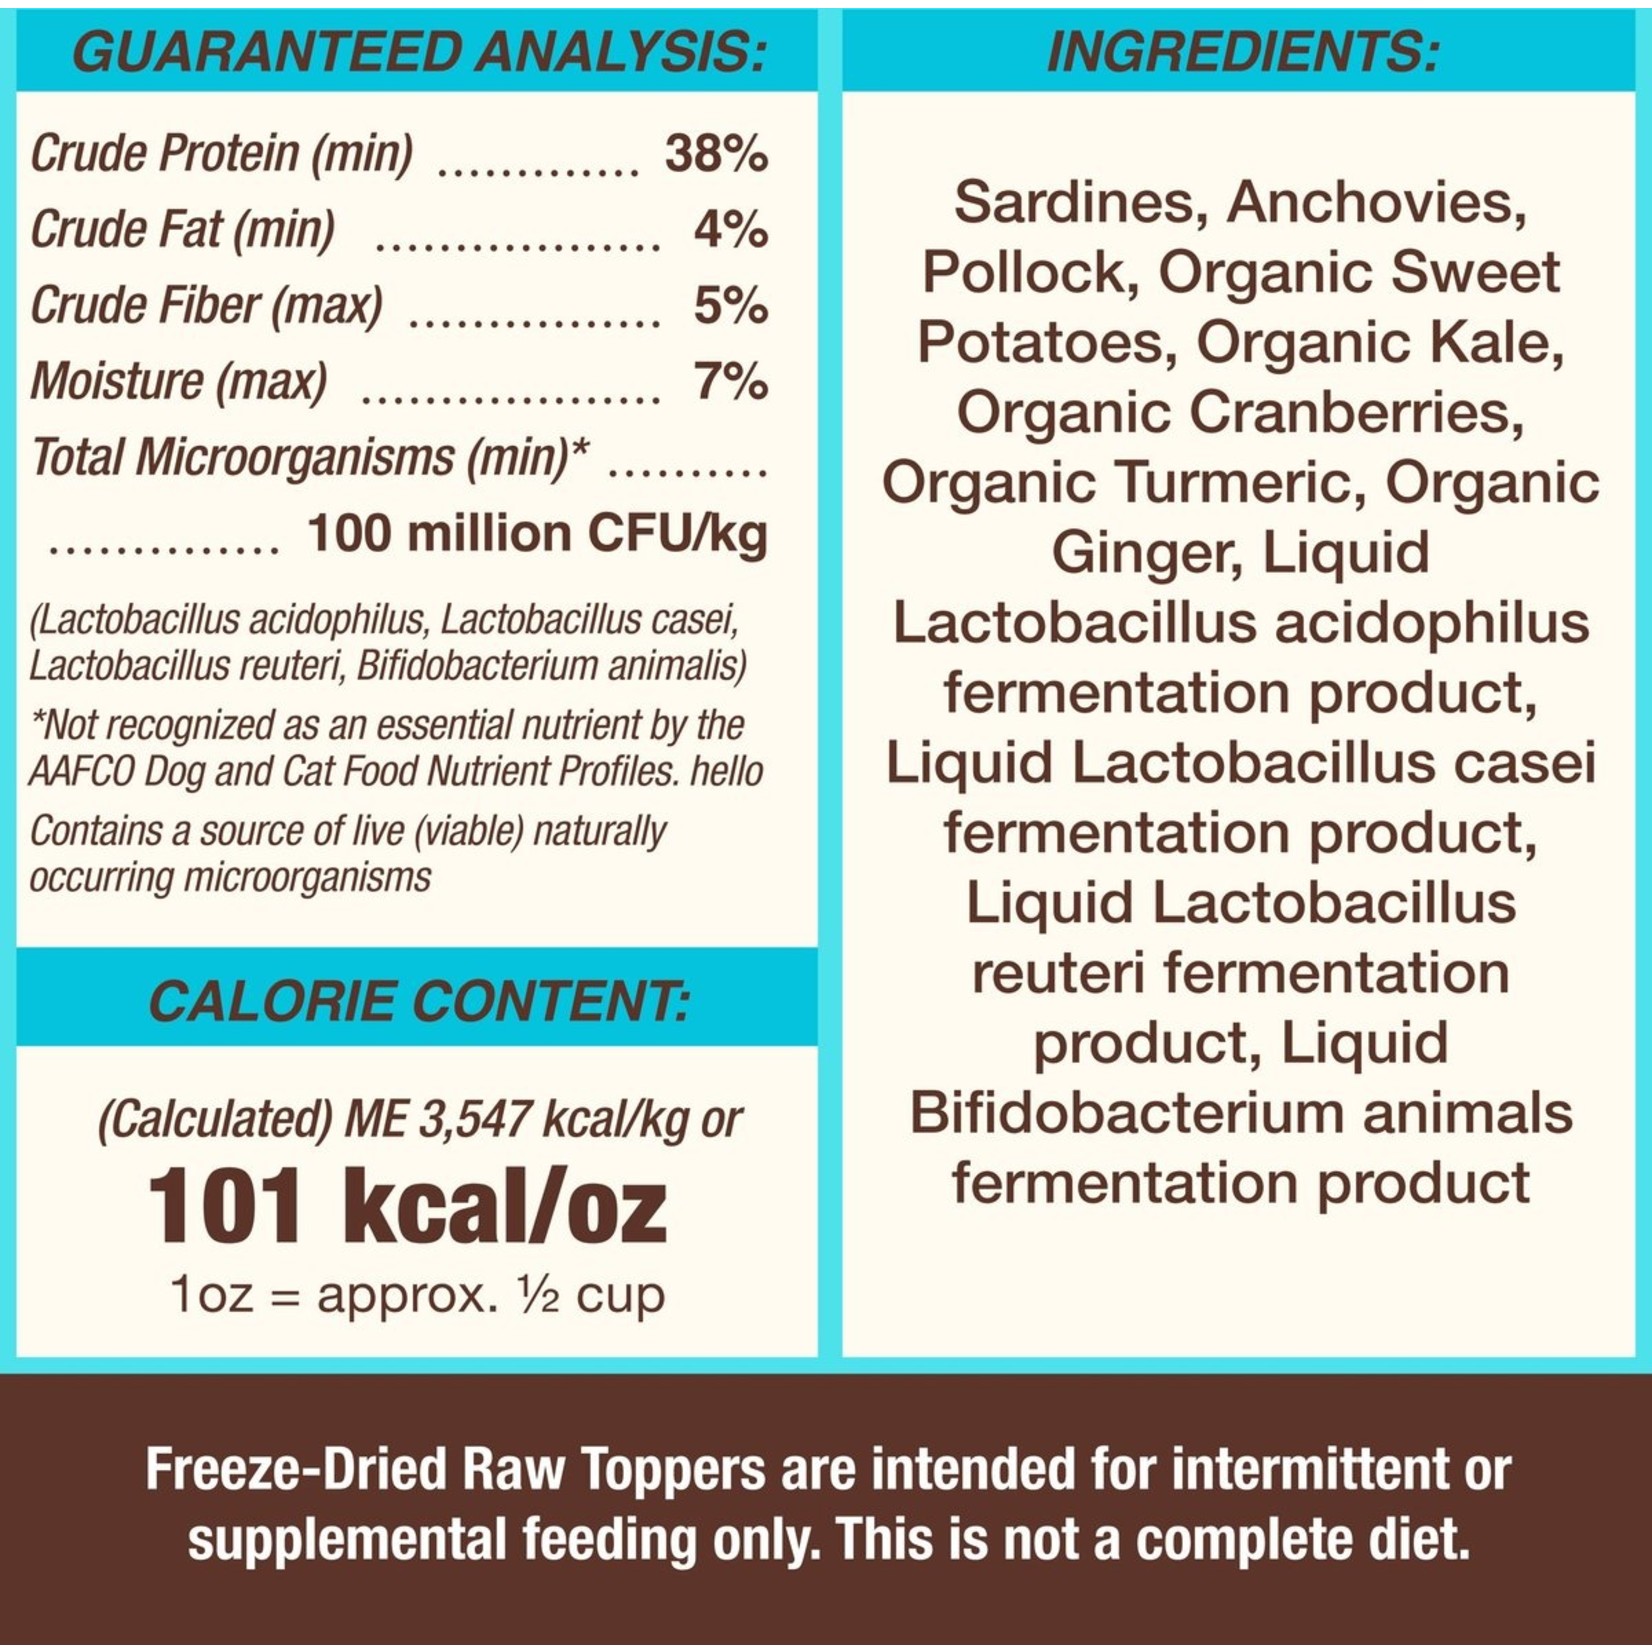 Primal Primal Freeze-Dried Toppers Fish Cupboard Cuts 3.5oz